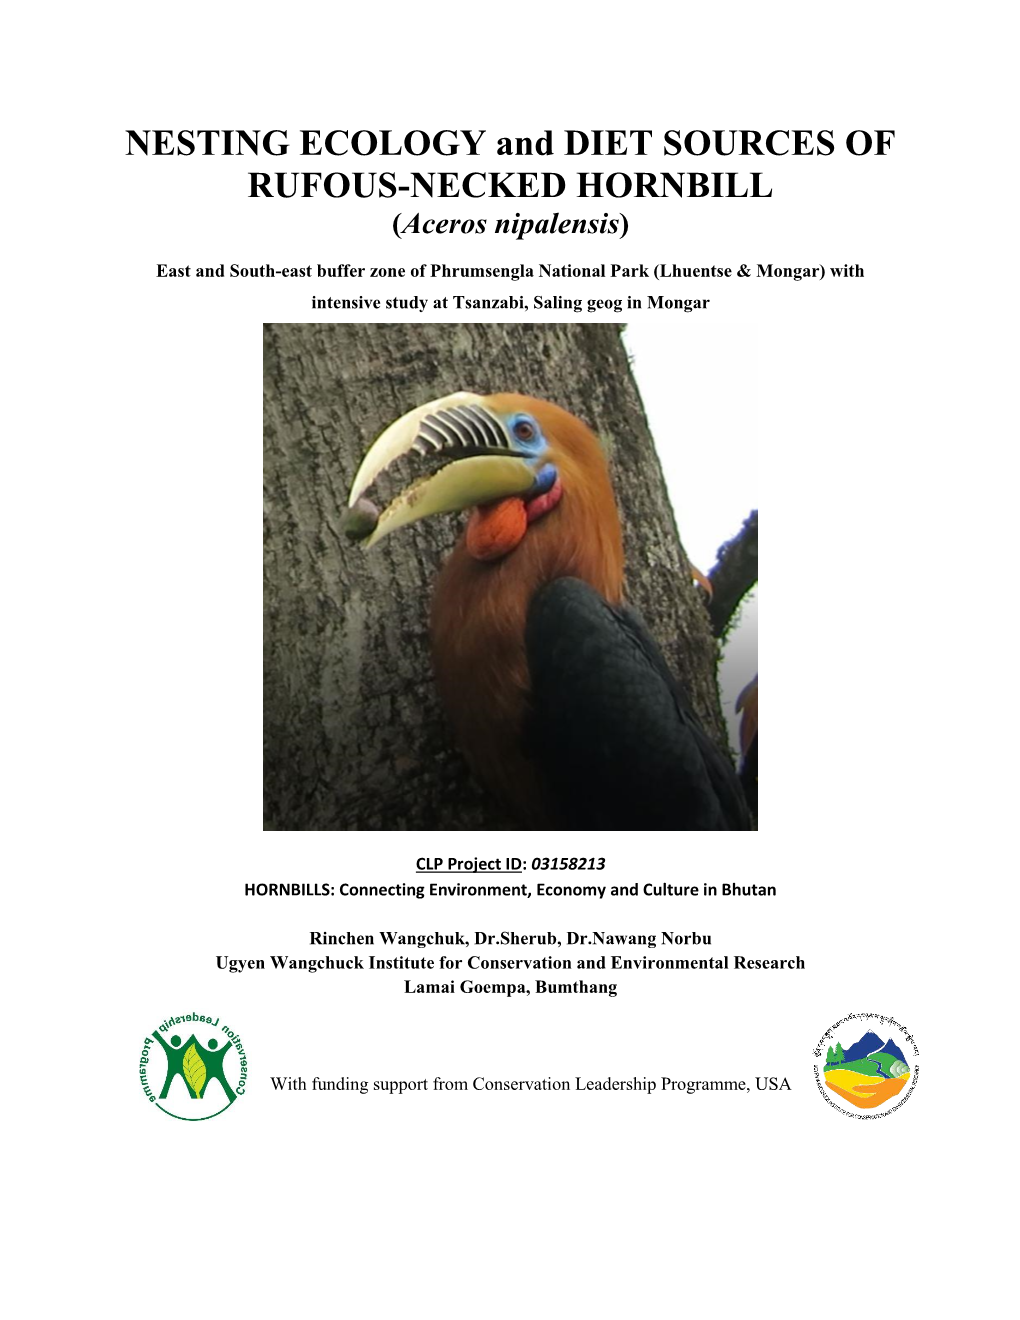 NESTING ECOLOGY and DIET SOURCES of RUFOUS-NECKED HORNBILL (Aceros Nipalensis)